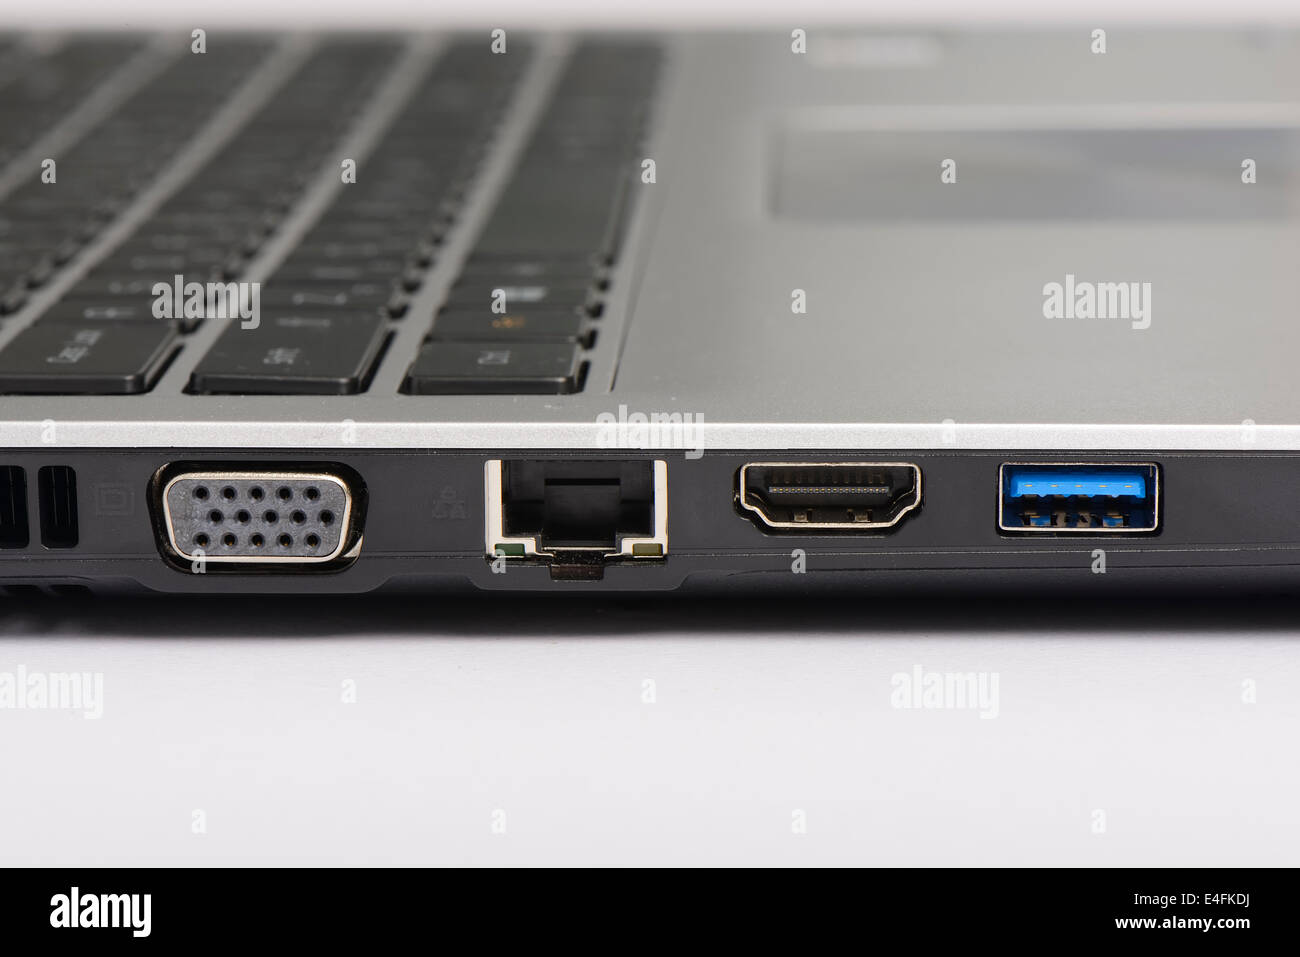 USB 3.0, LAN and graphic ports of laptop computer Stock Photo